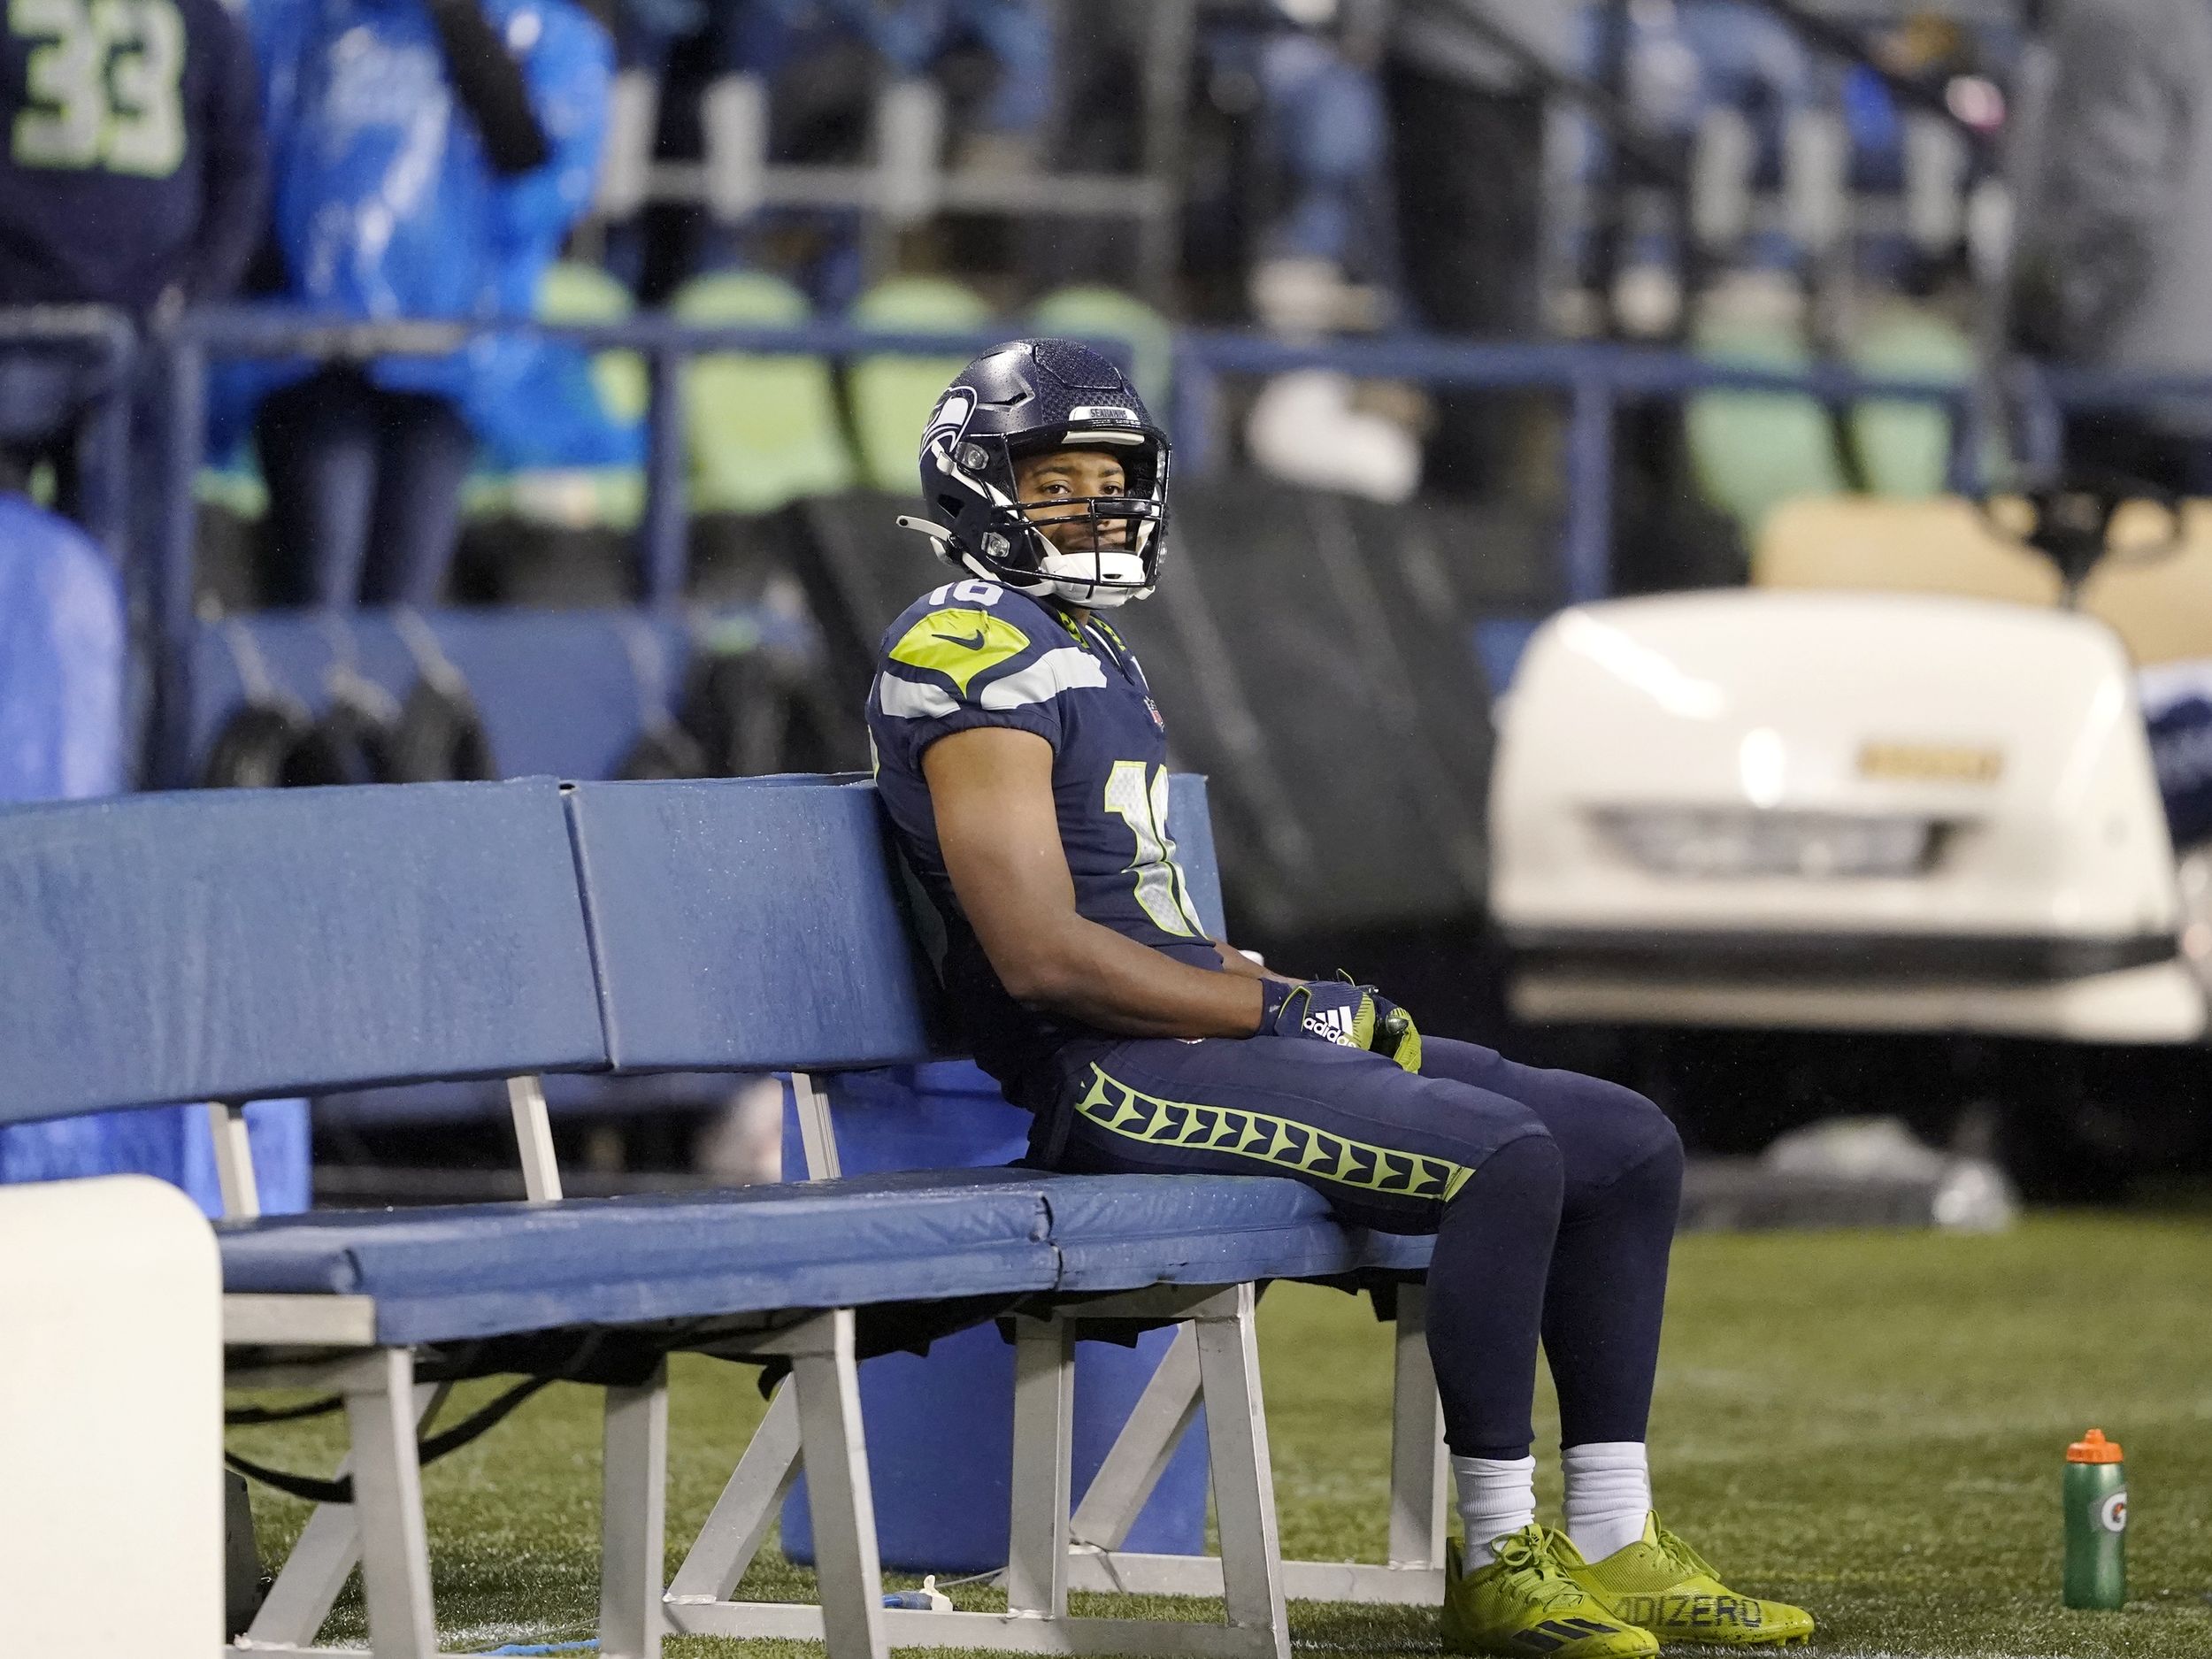 There is nothing fluky about how Geno Smith and Russell Wilson